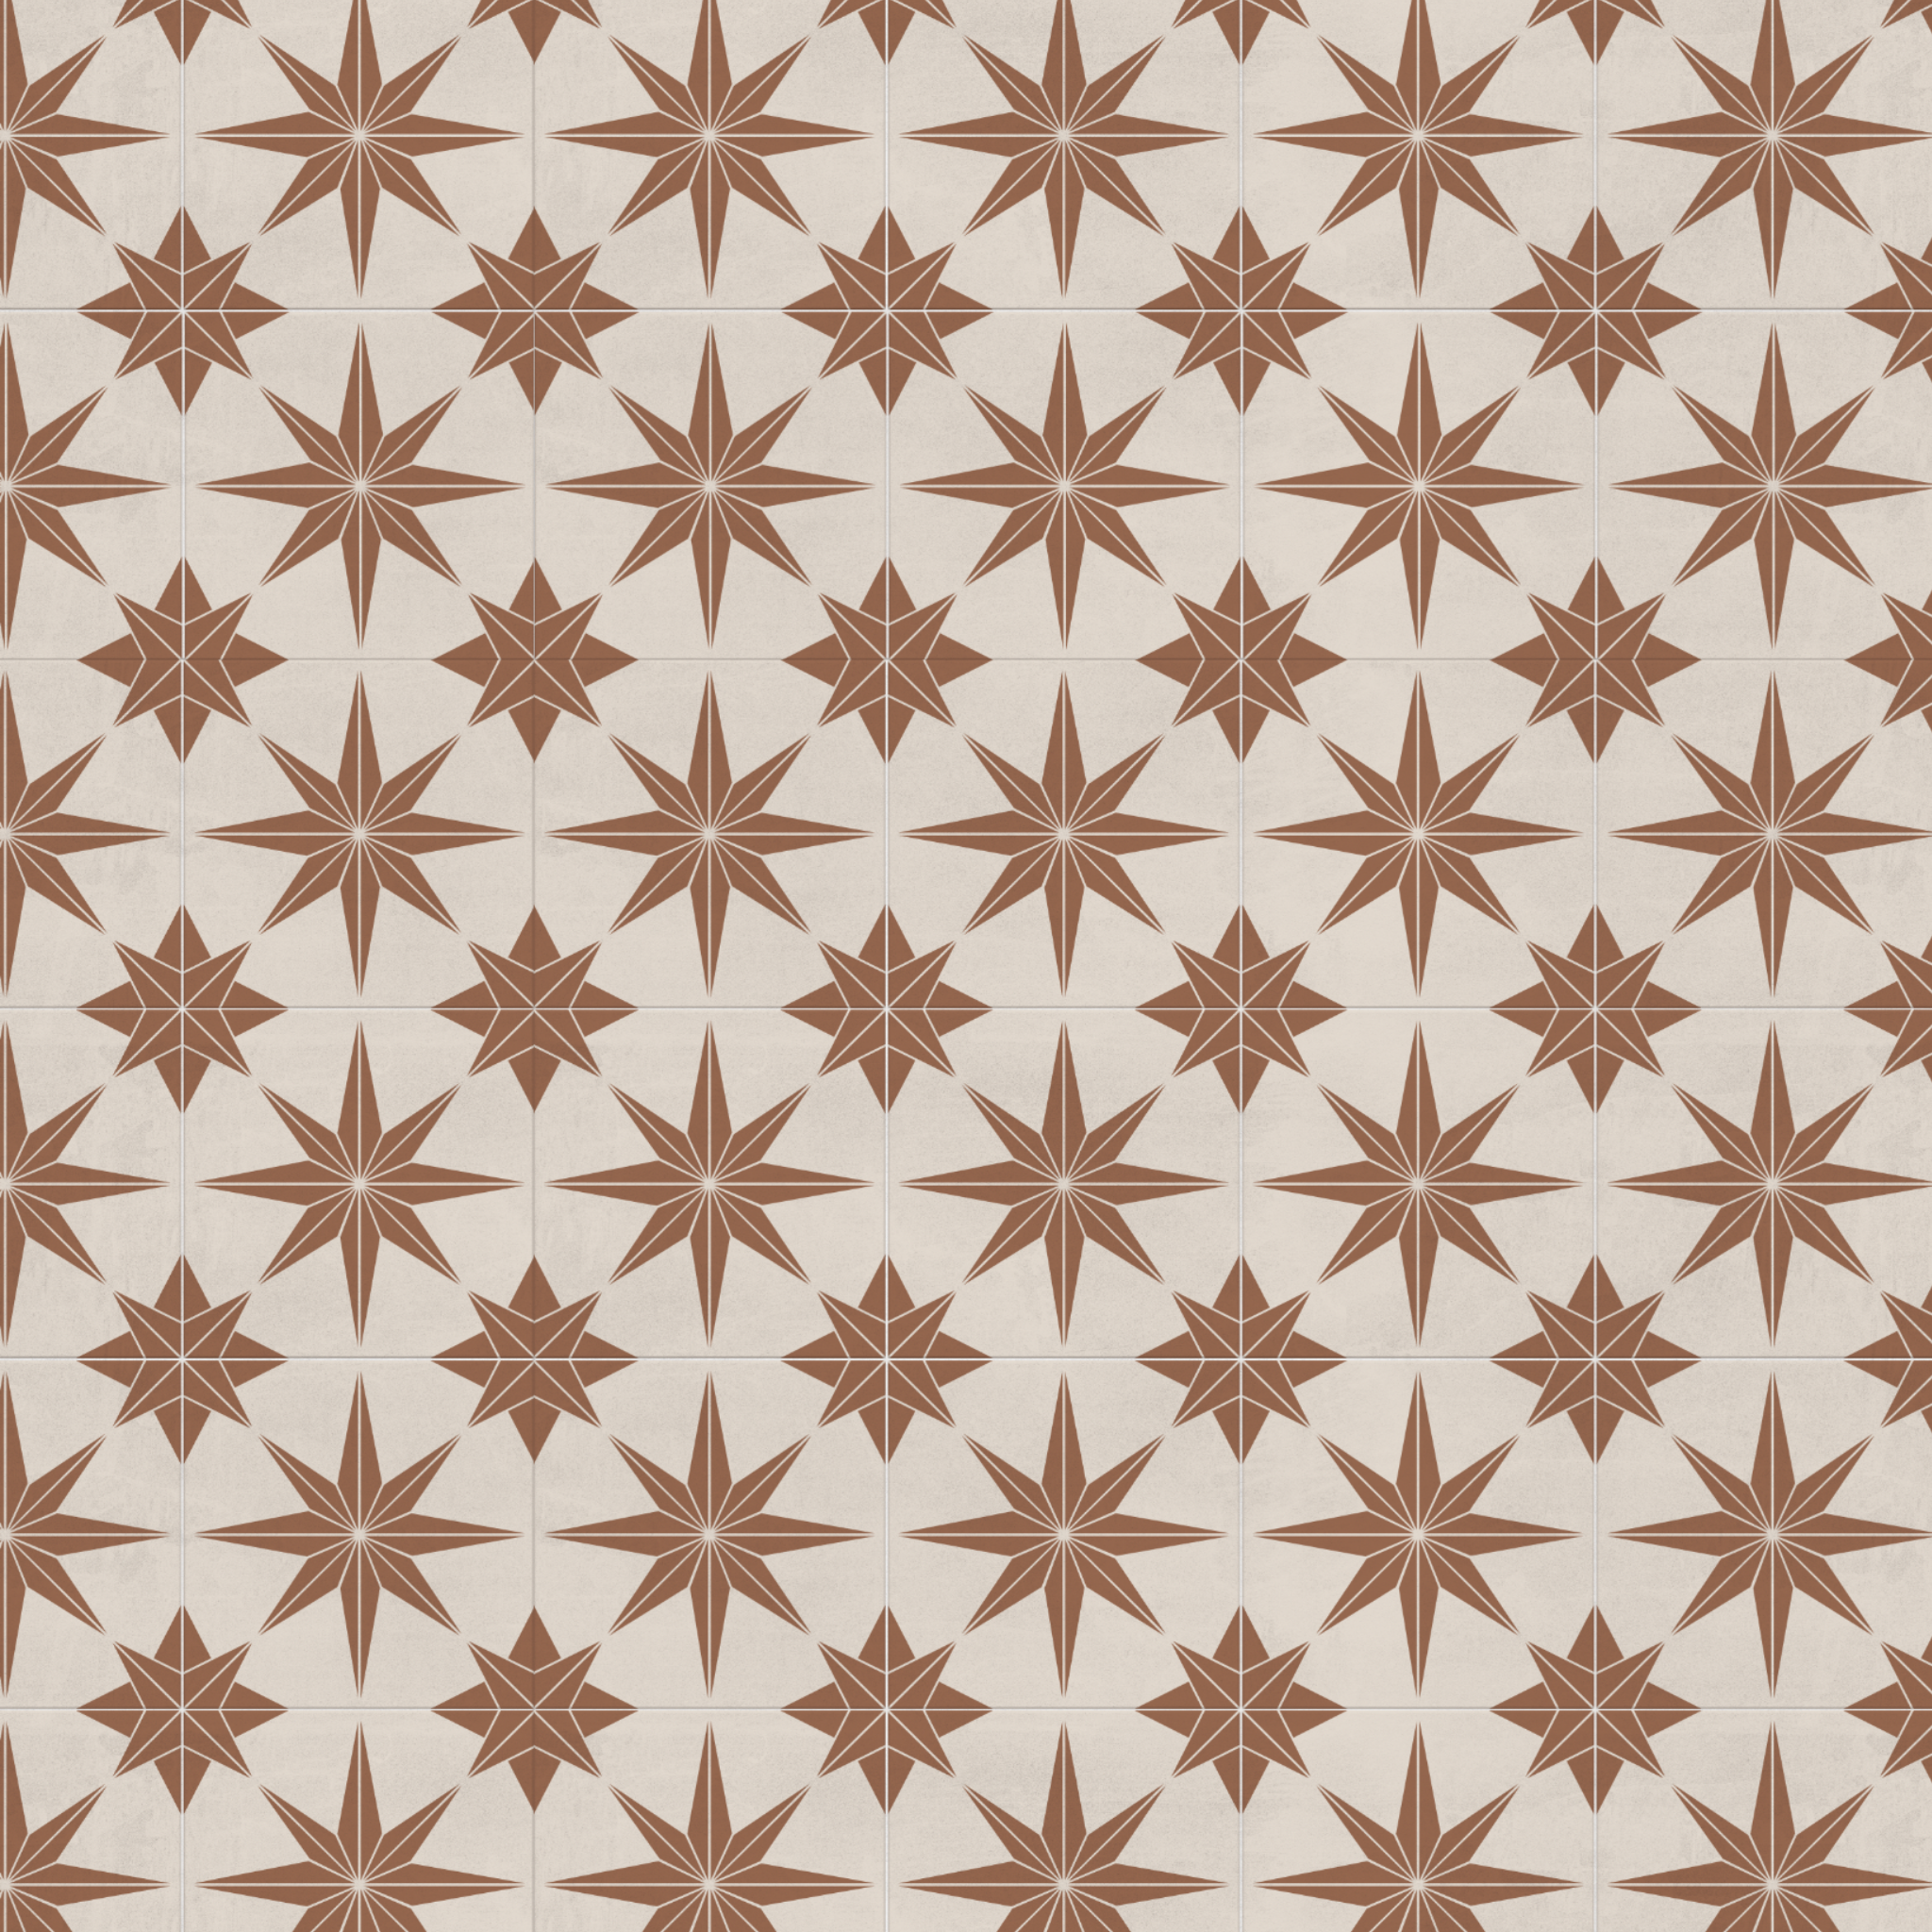 "Reality Star (Clay) Wallpaper by Wall Blush enhancing a modern living room's aesthetic."